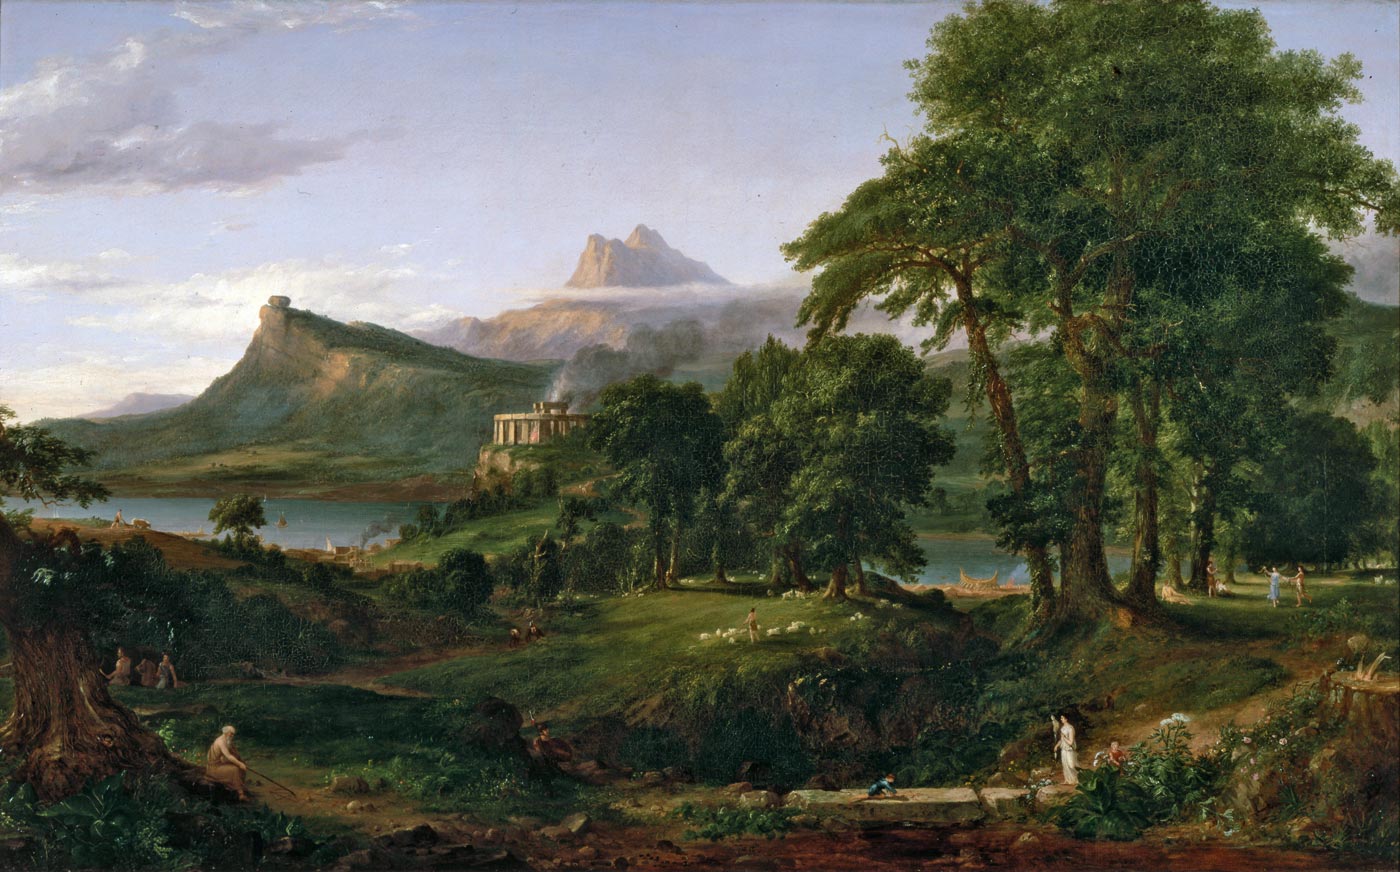 Thomas Cole, The Course of the Empire II: The Arcadian State, 1836